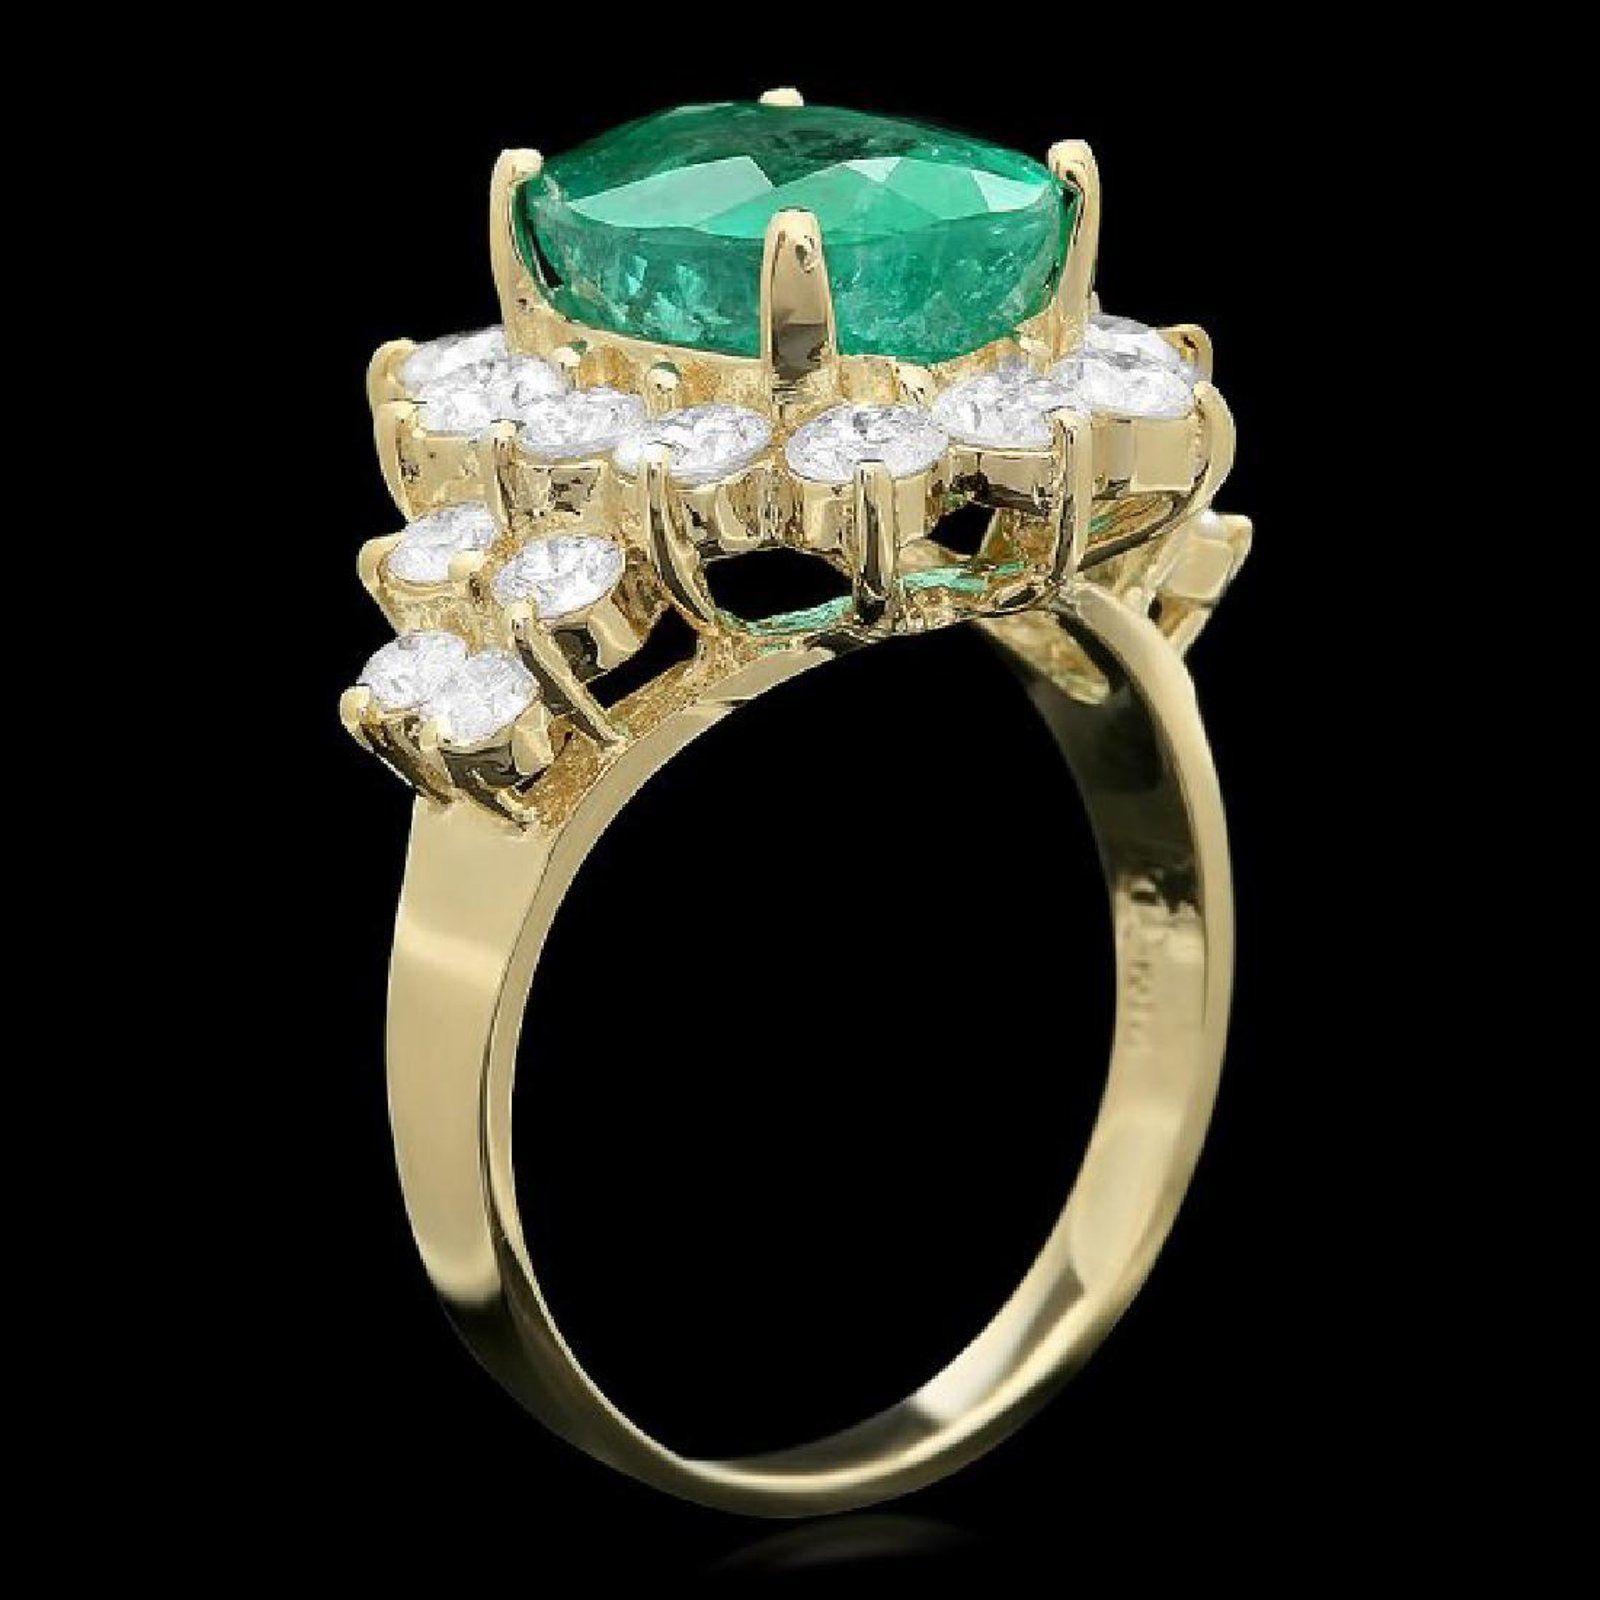 5.90 Carats Natural Emerald and Diamond 14K Solid Yellow Gold Ring

Total Natural Green Emerald Weight is: 4.20 Carats

Emerald Measures: 12.00 x 9.00mm

Natural Round Diamonds Weight: 1.70 Carats (color G-H / Clarity SI1-SI2)

Ring size: 7 (we